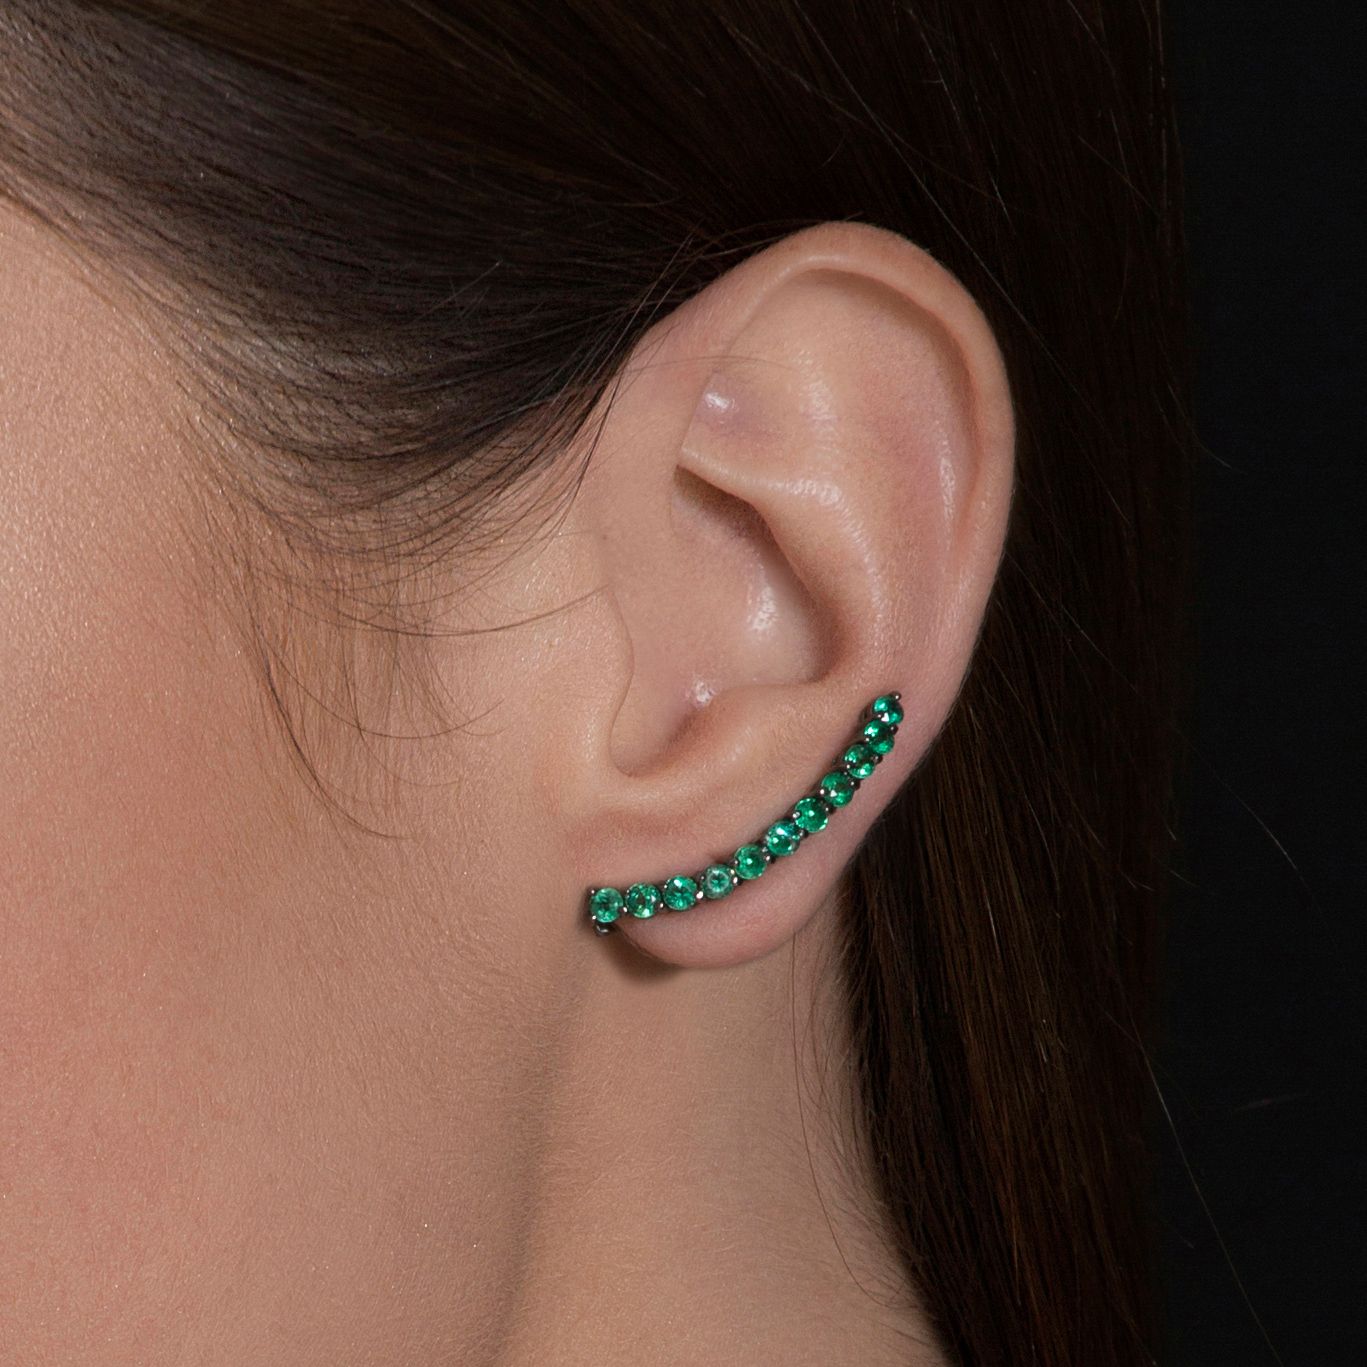 UNIVERSE COMET EARRING IN BLACK RHODIUM PLATED 18K WHITE GOLD WITH EMERALD